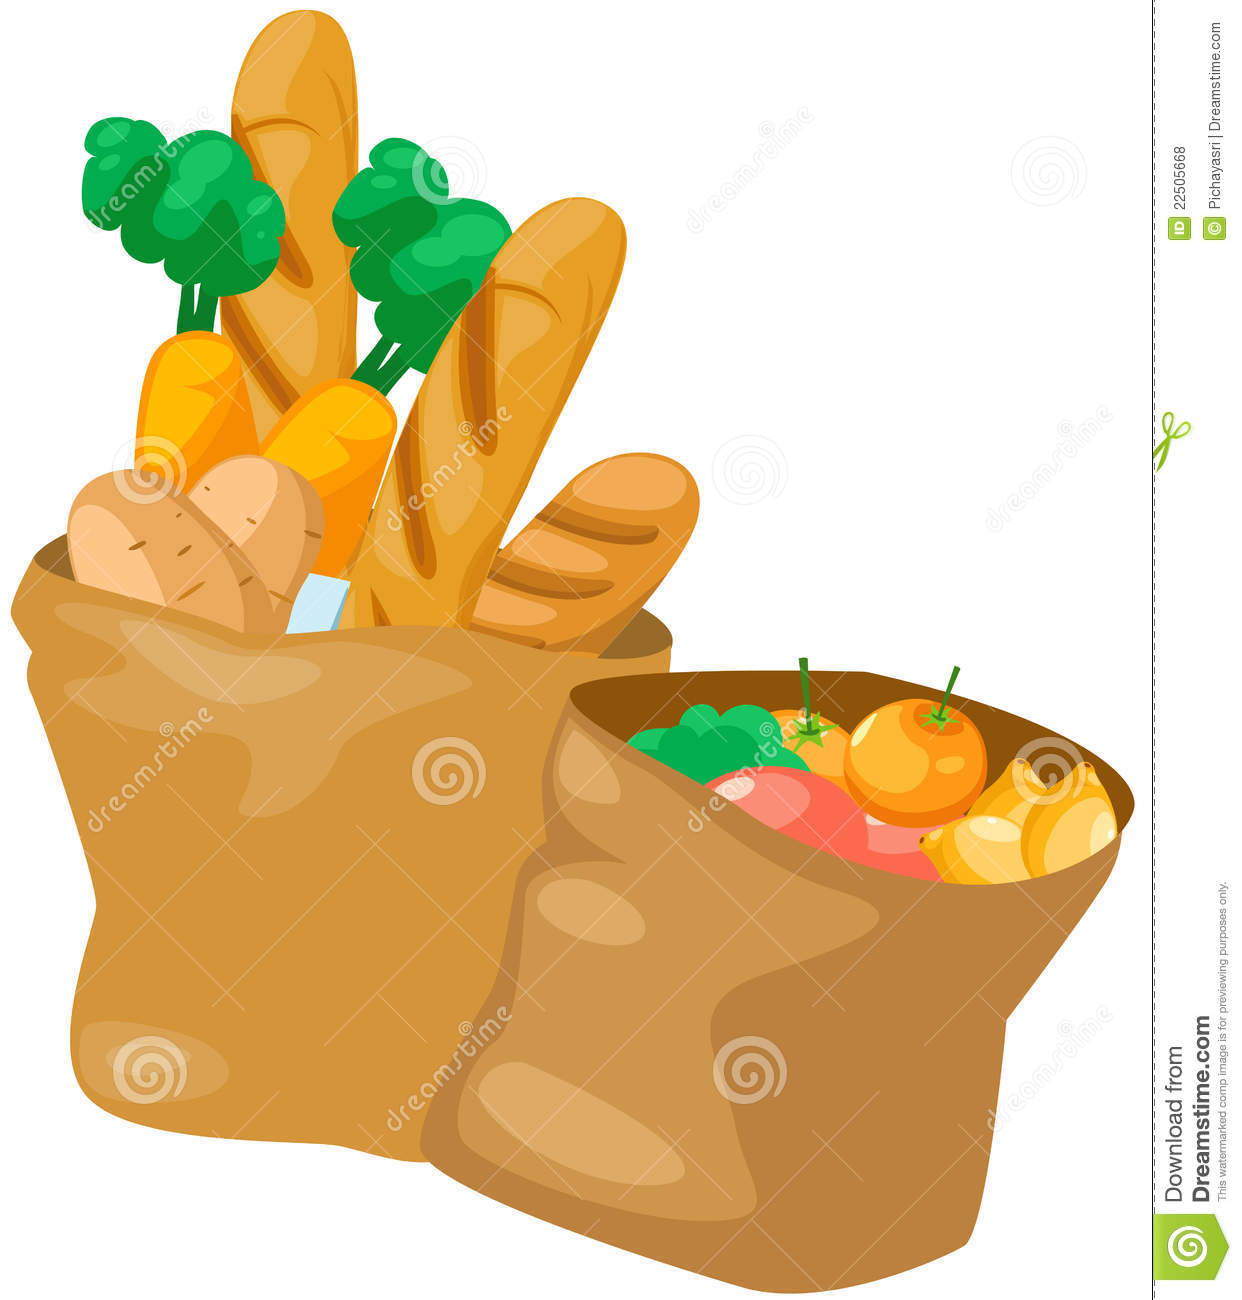 Isolated Paper Bag With Food On White Background Mr No Pr No 4 1005 10